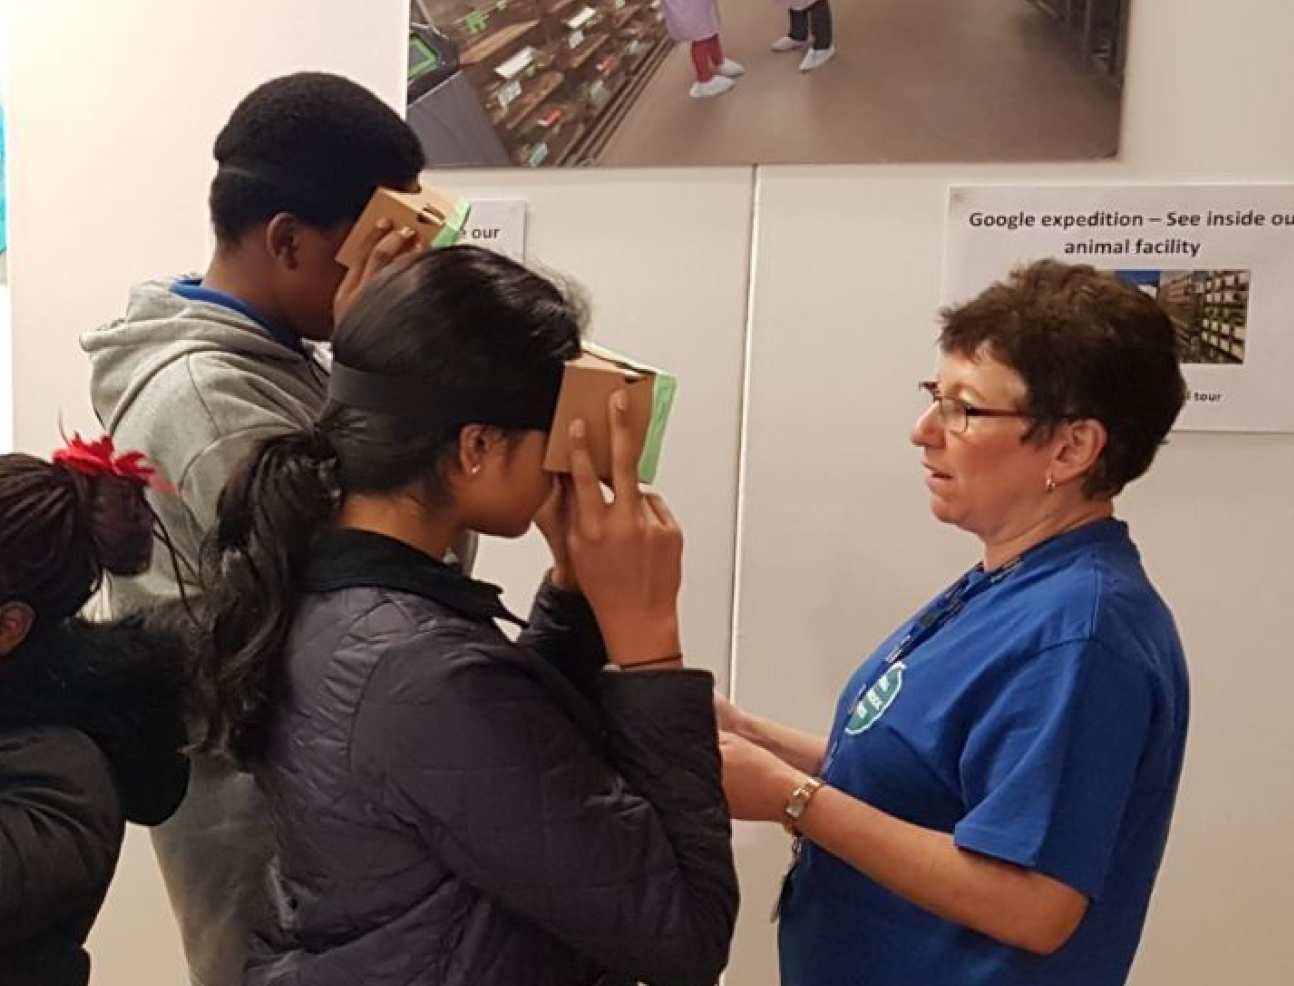 Visitors try out the google expedition